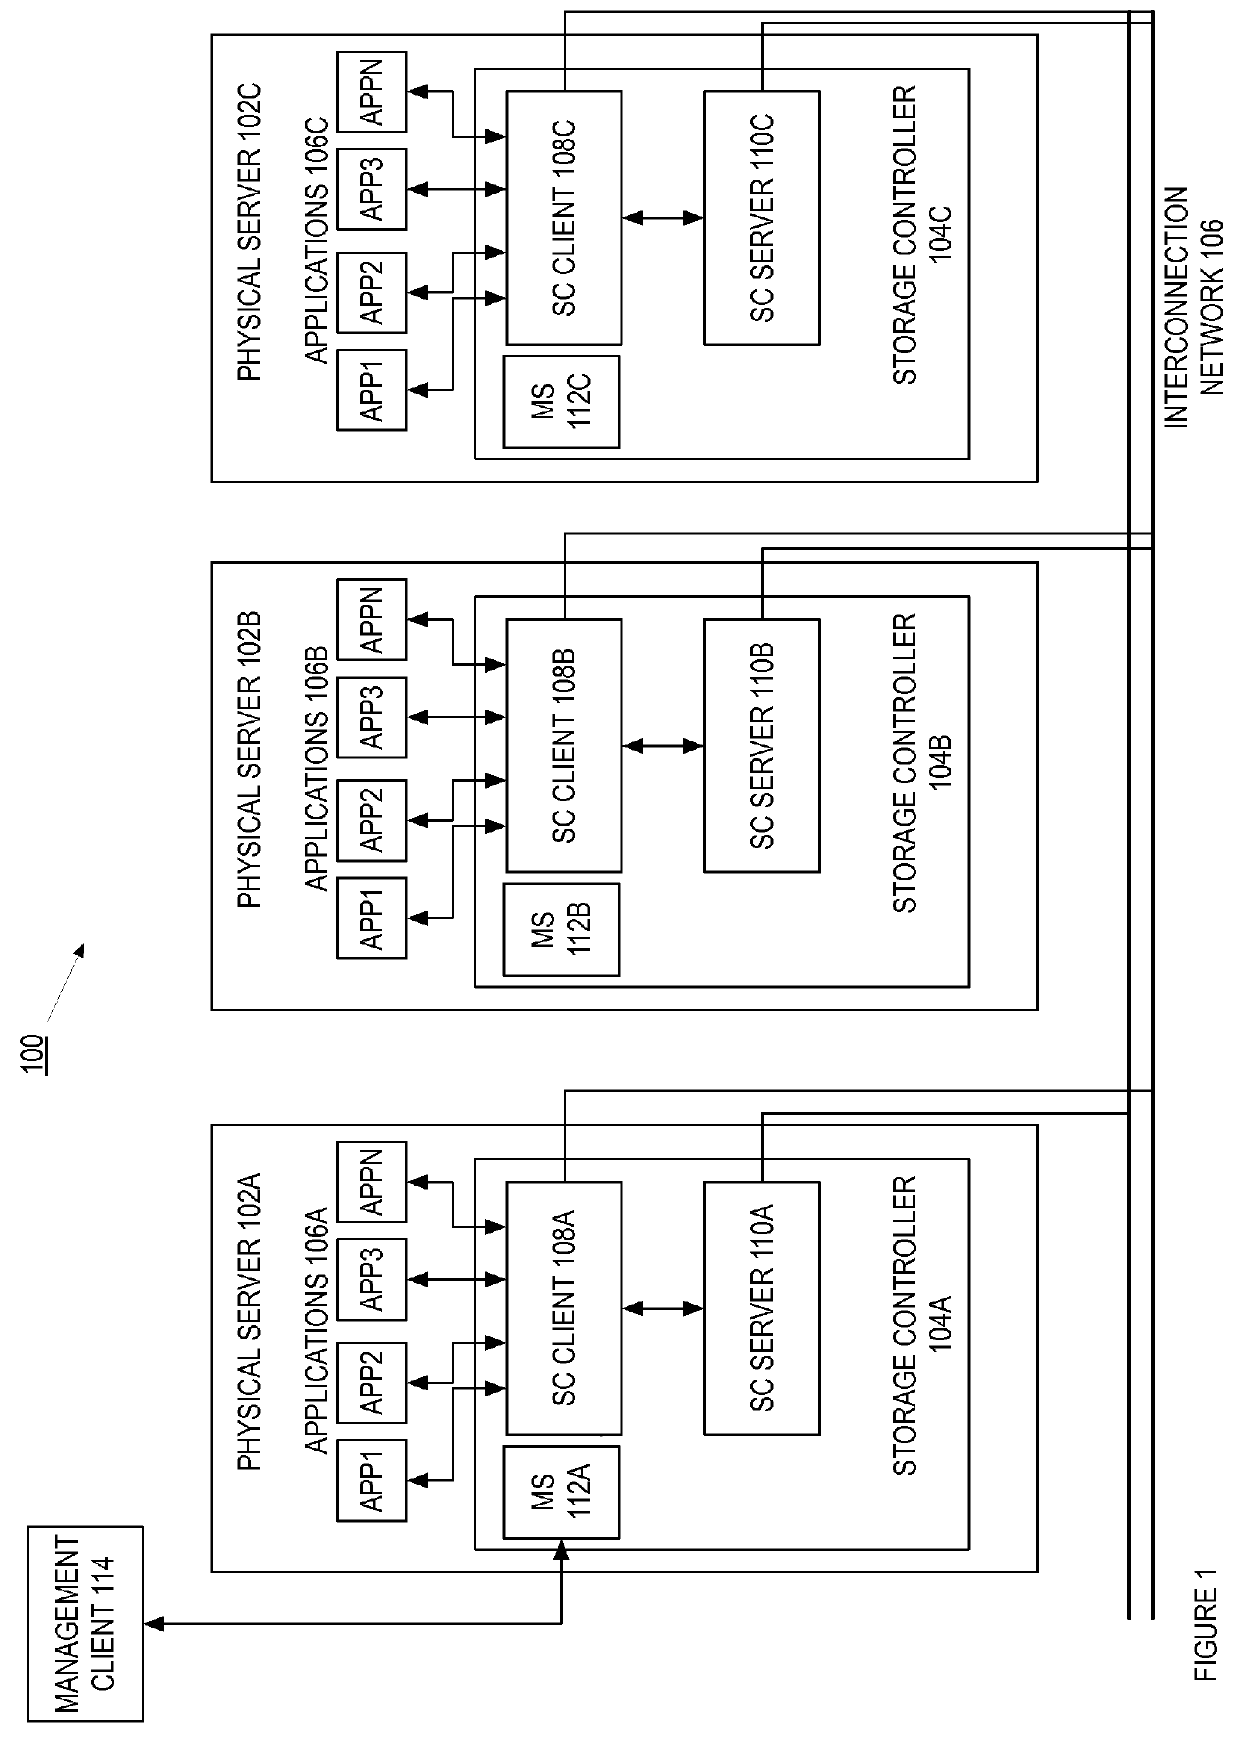 Automated load balancing across the distributed system of hybrid storage and compute nodes